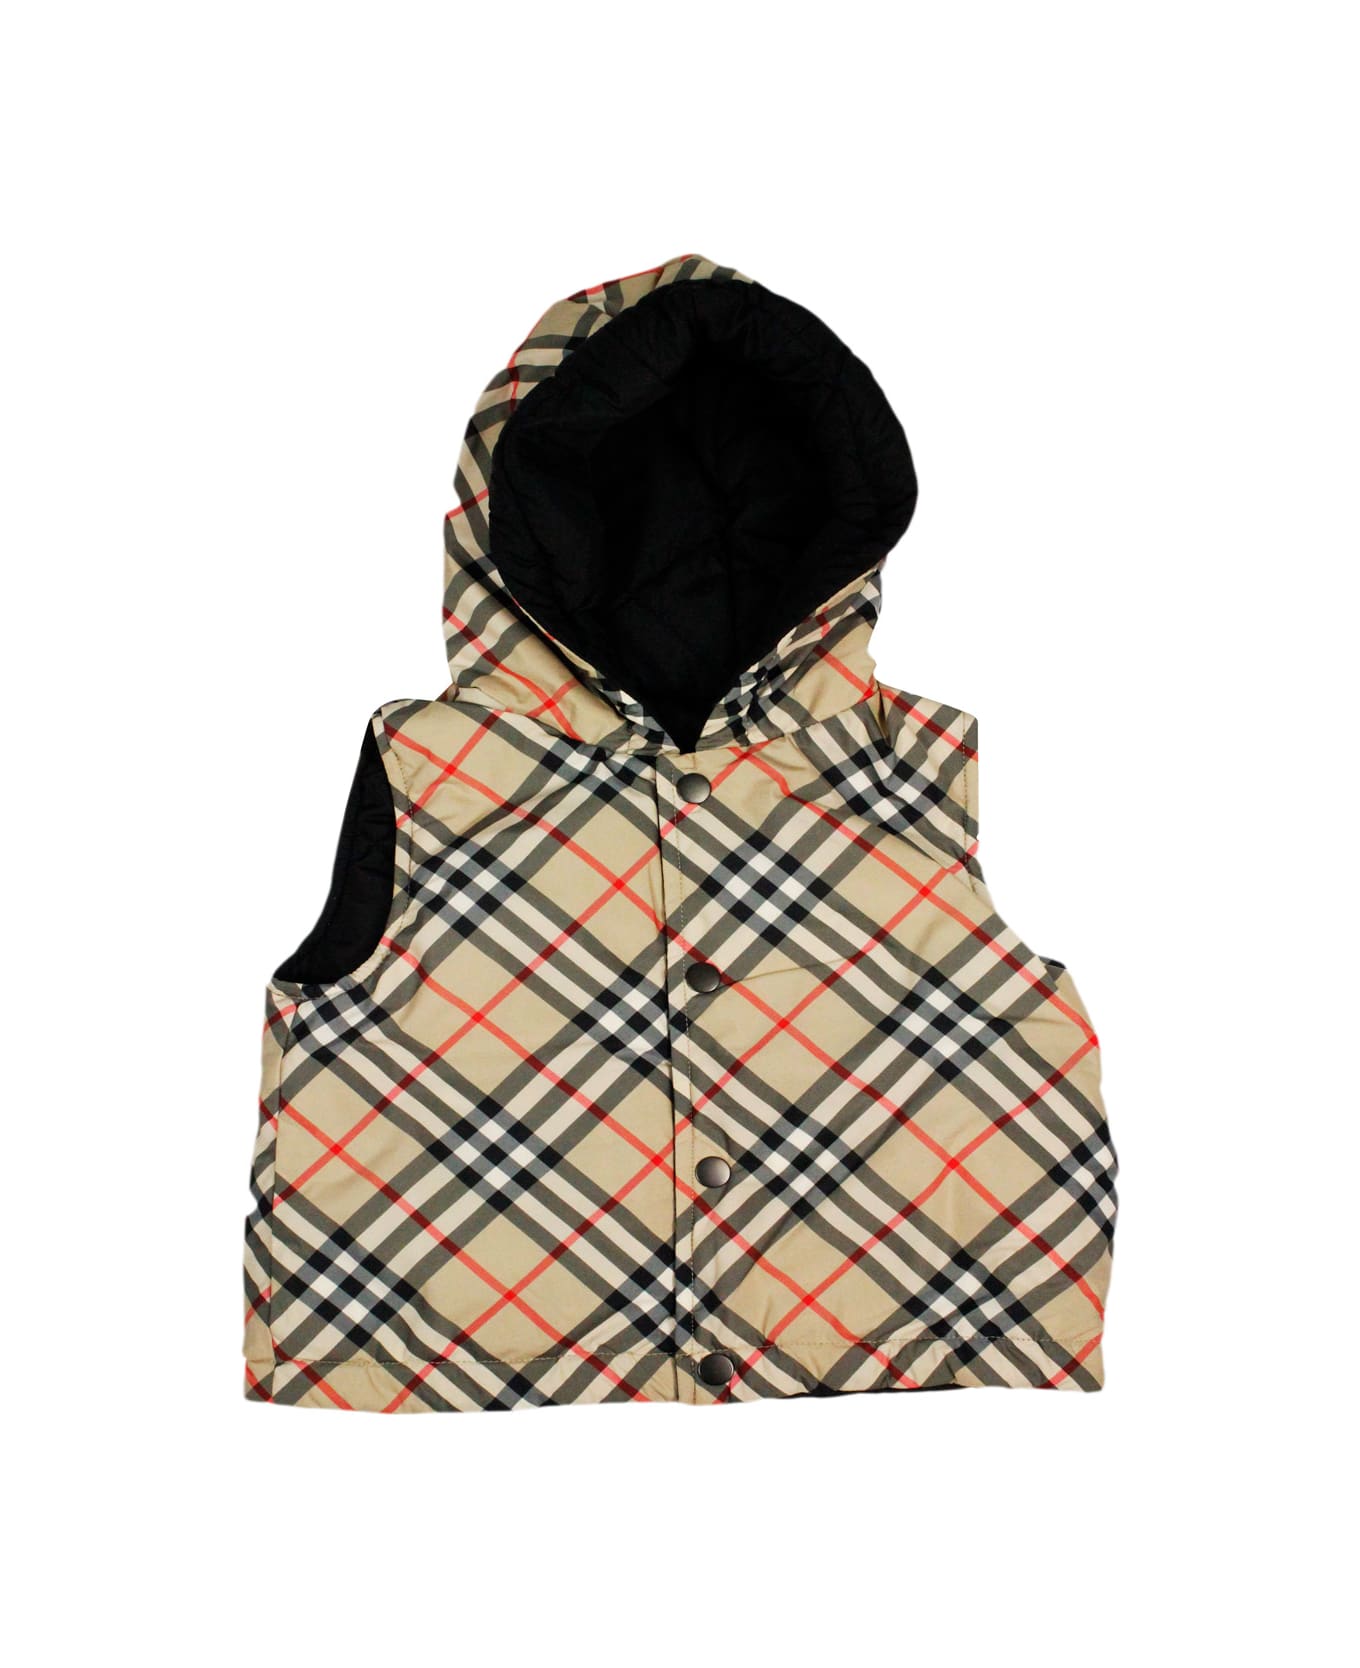 Burberry Reversible Vest With Check Pattern, With Solid Color Quilted Interior - Beige コート＆ジャケット